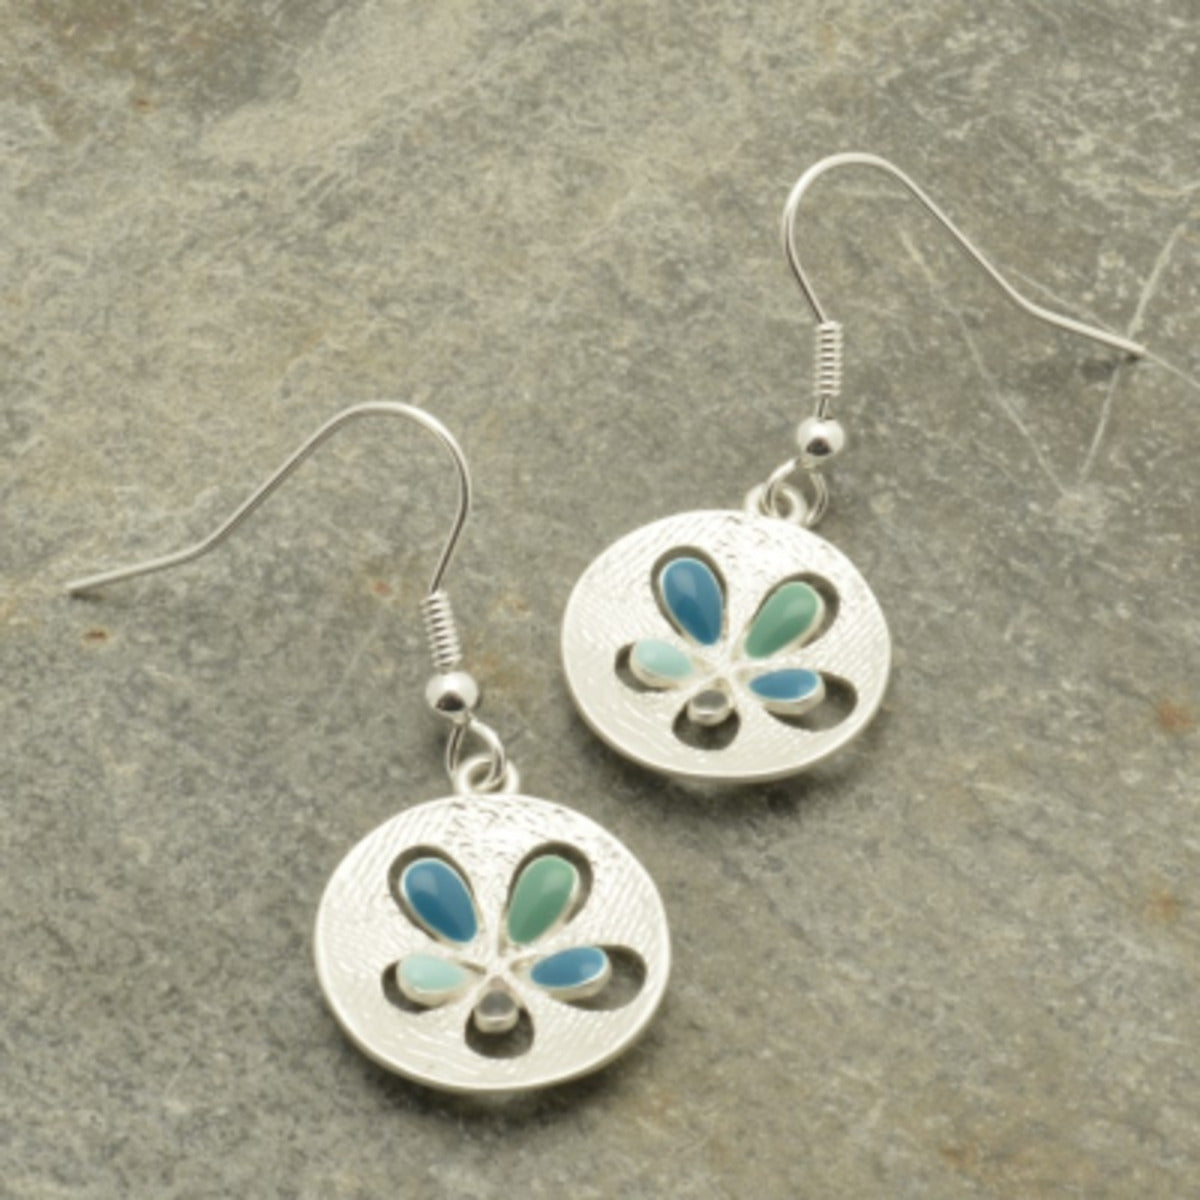 Make a statement with these stunning Aqua Popout Earrings! Petals of aqua, teal, mint and grey create intricate detail that stands out against a matt silver disc. Add a subtle pop of color that will elevate any look.  They measure approx 1.6cm in diameter and hang from fishhooks.